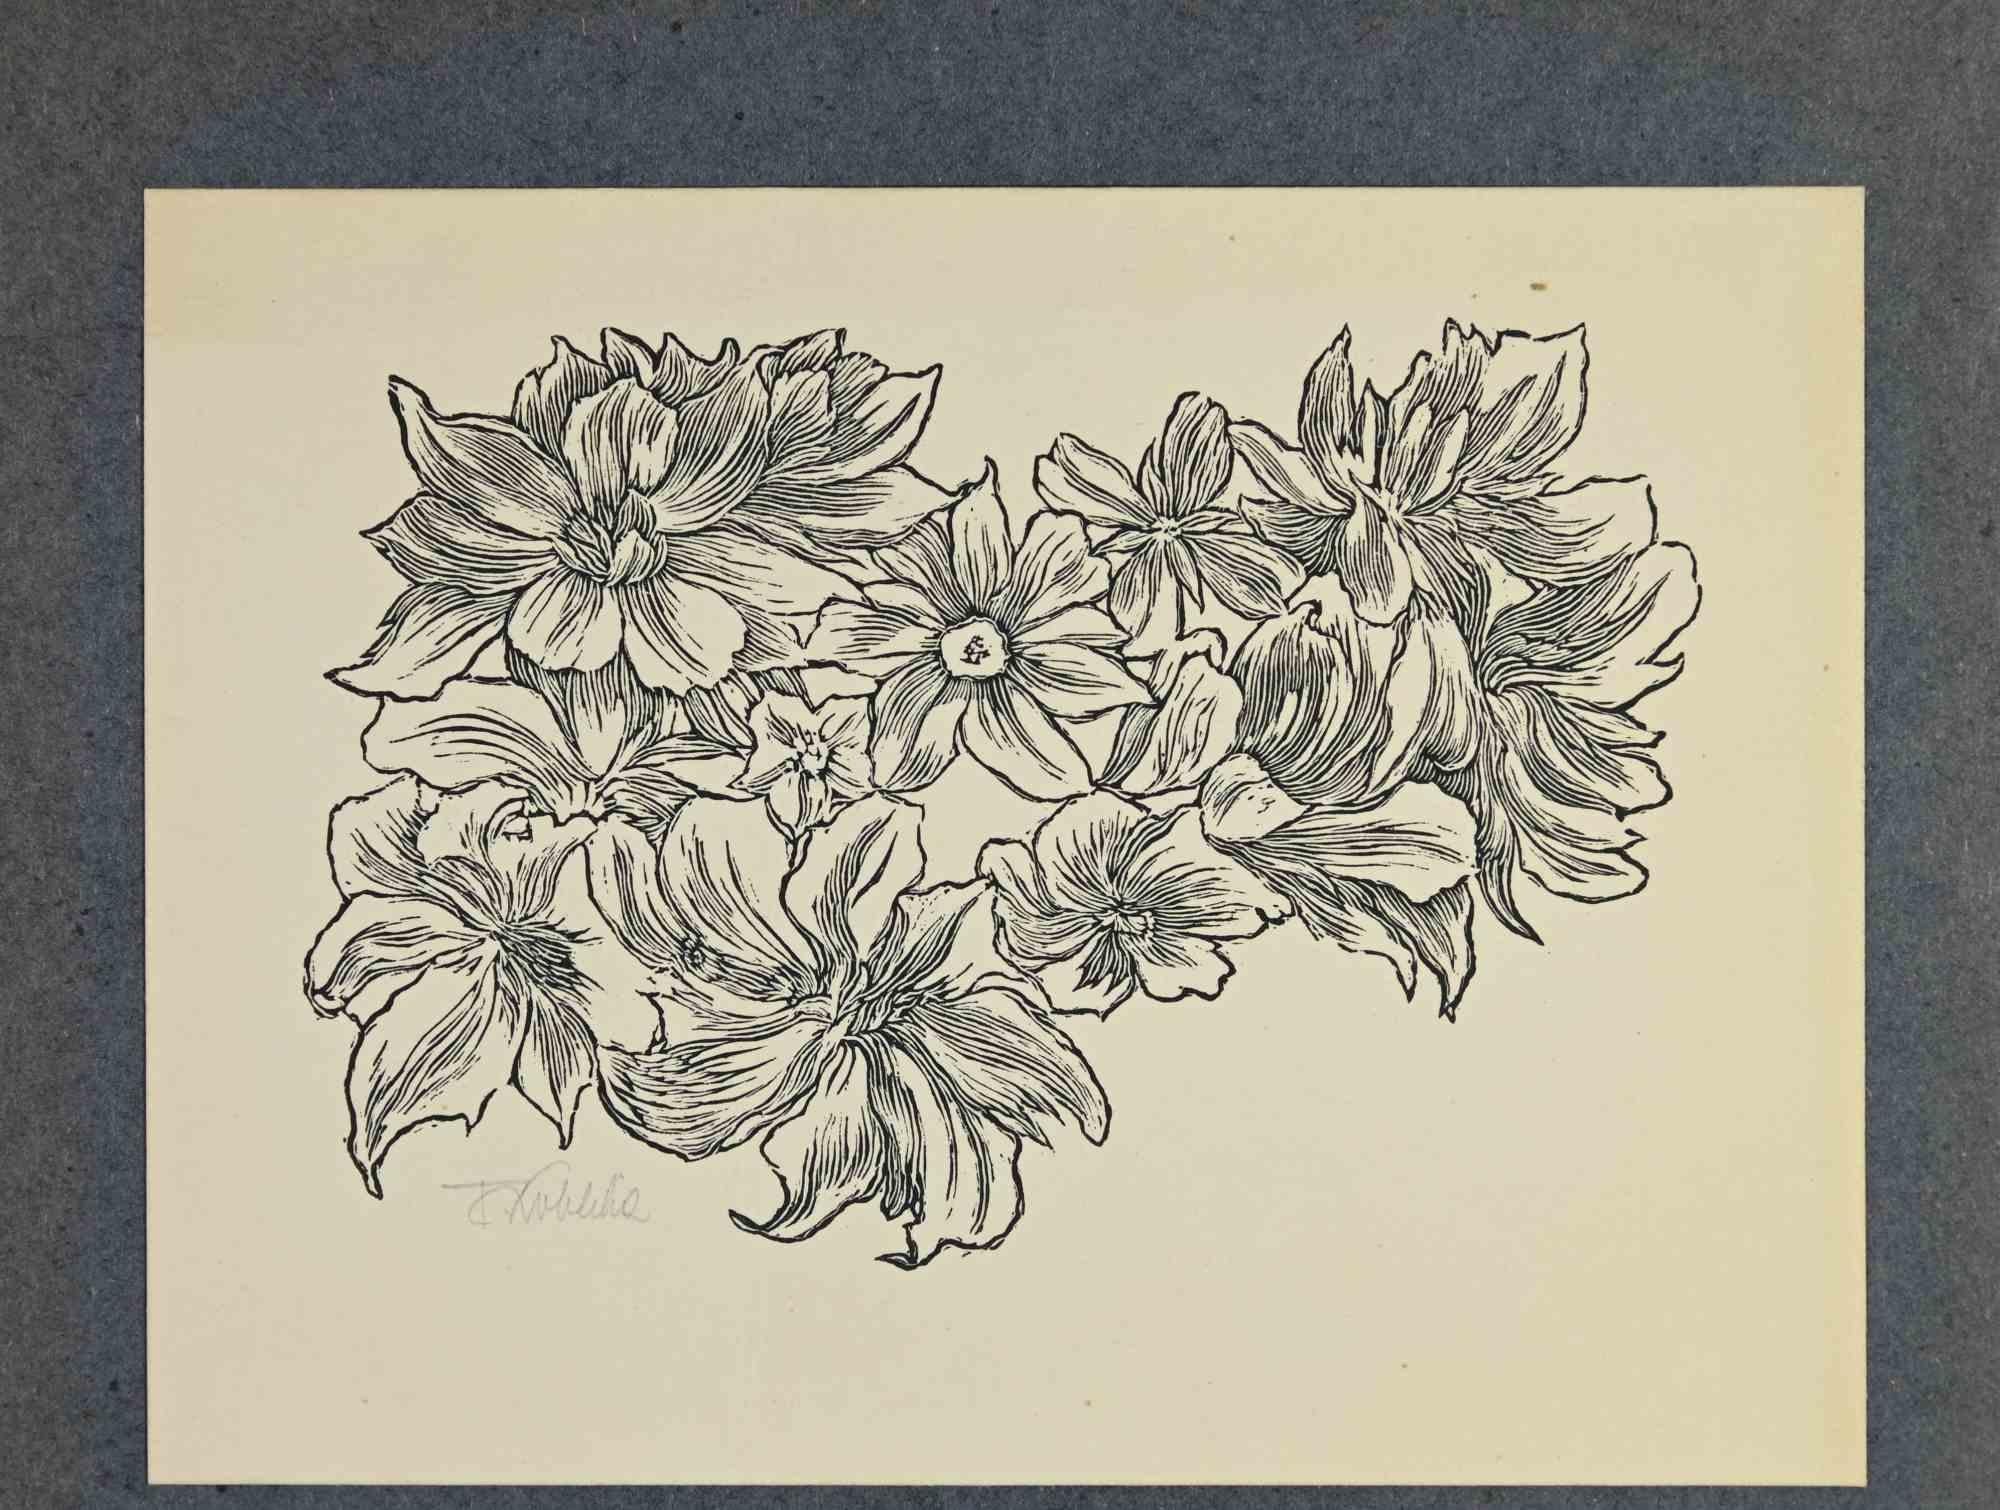 Ex Libris - Flowers is an Artwork realized in 1951, by the artist  Frantisek Kobliha (1877-1962).                                                       
Woodcut print on ivory paper. Hand signed on the left corner.

The work is glued on colored